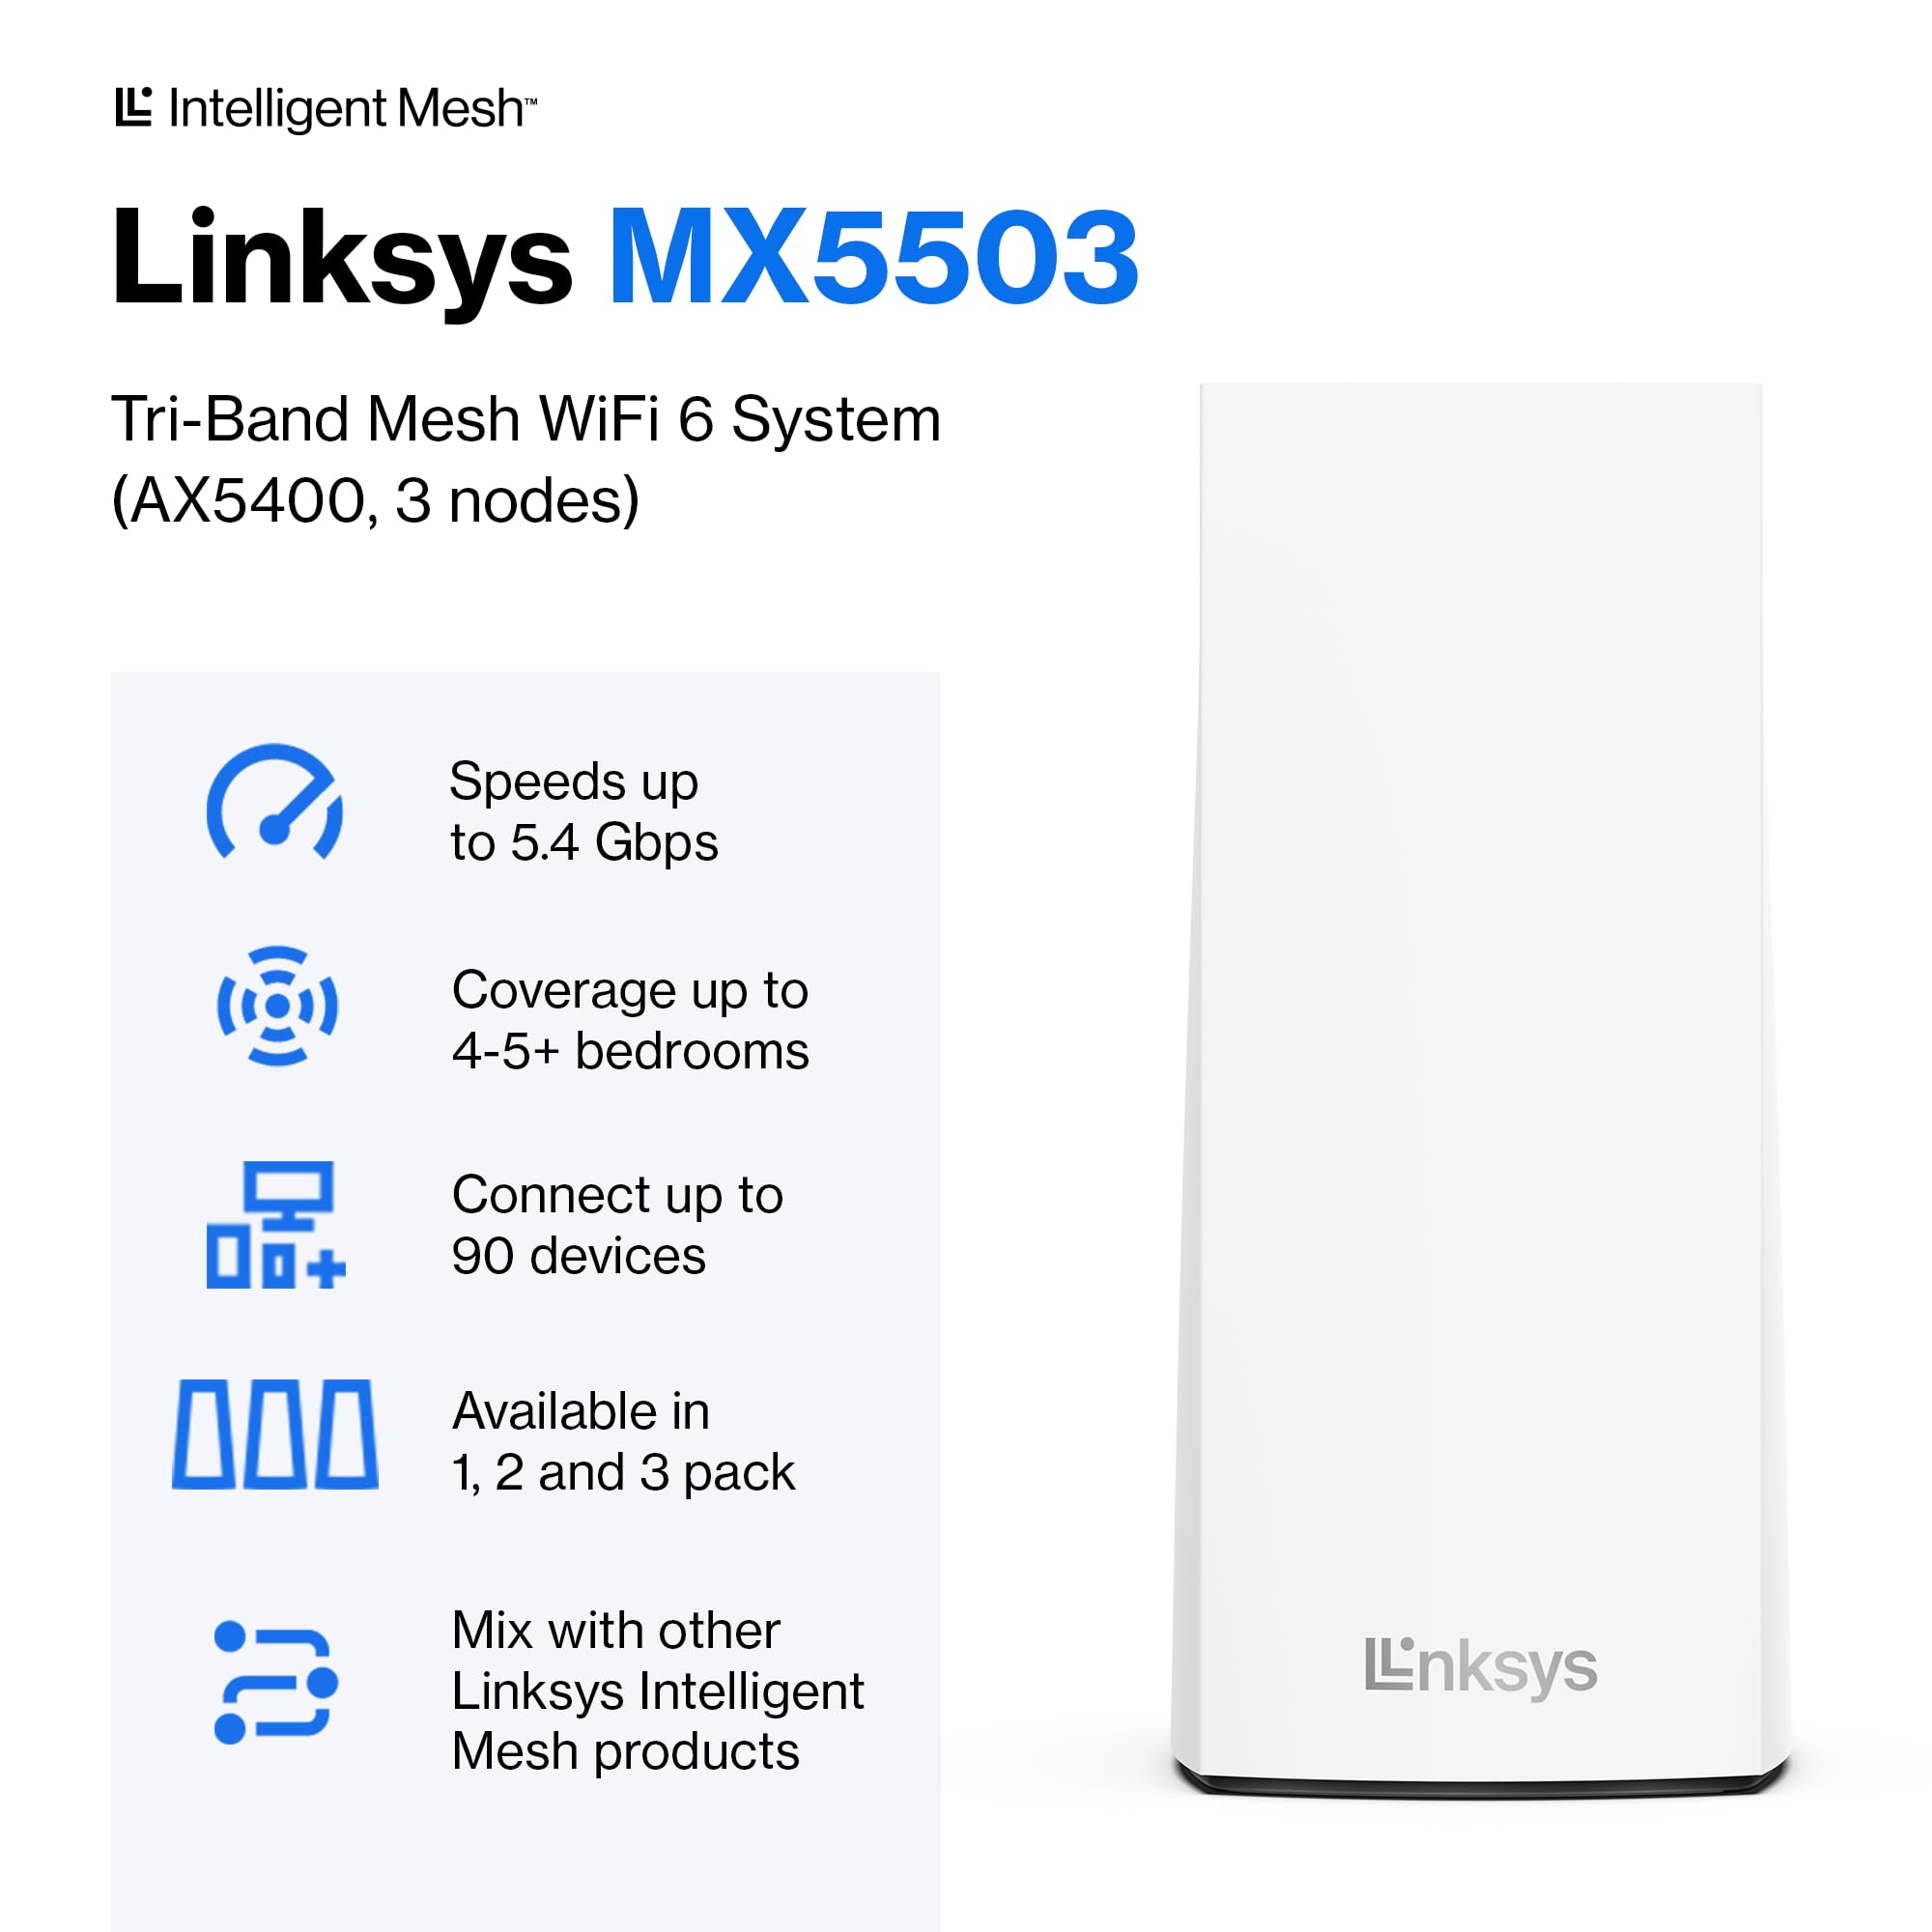 Linksys Atlas WiFi 6 Router Home WiFi Mesh System, Dual-Band, 8,100 Sq. ft Coverage, 90+ Devices, Speeds up to (AX5400) 5.4Gbps - MX5503-AMZ